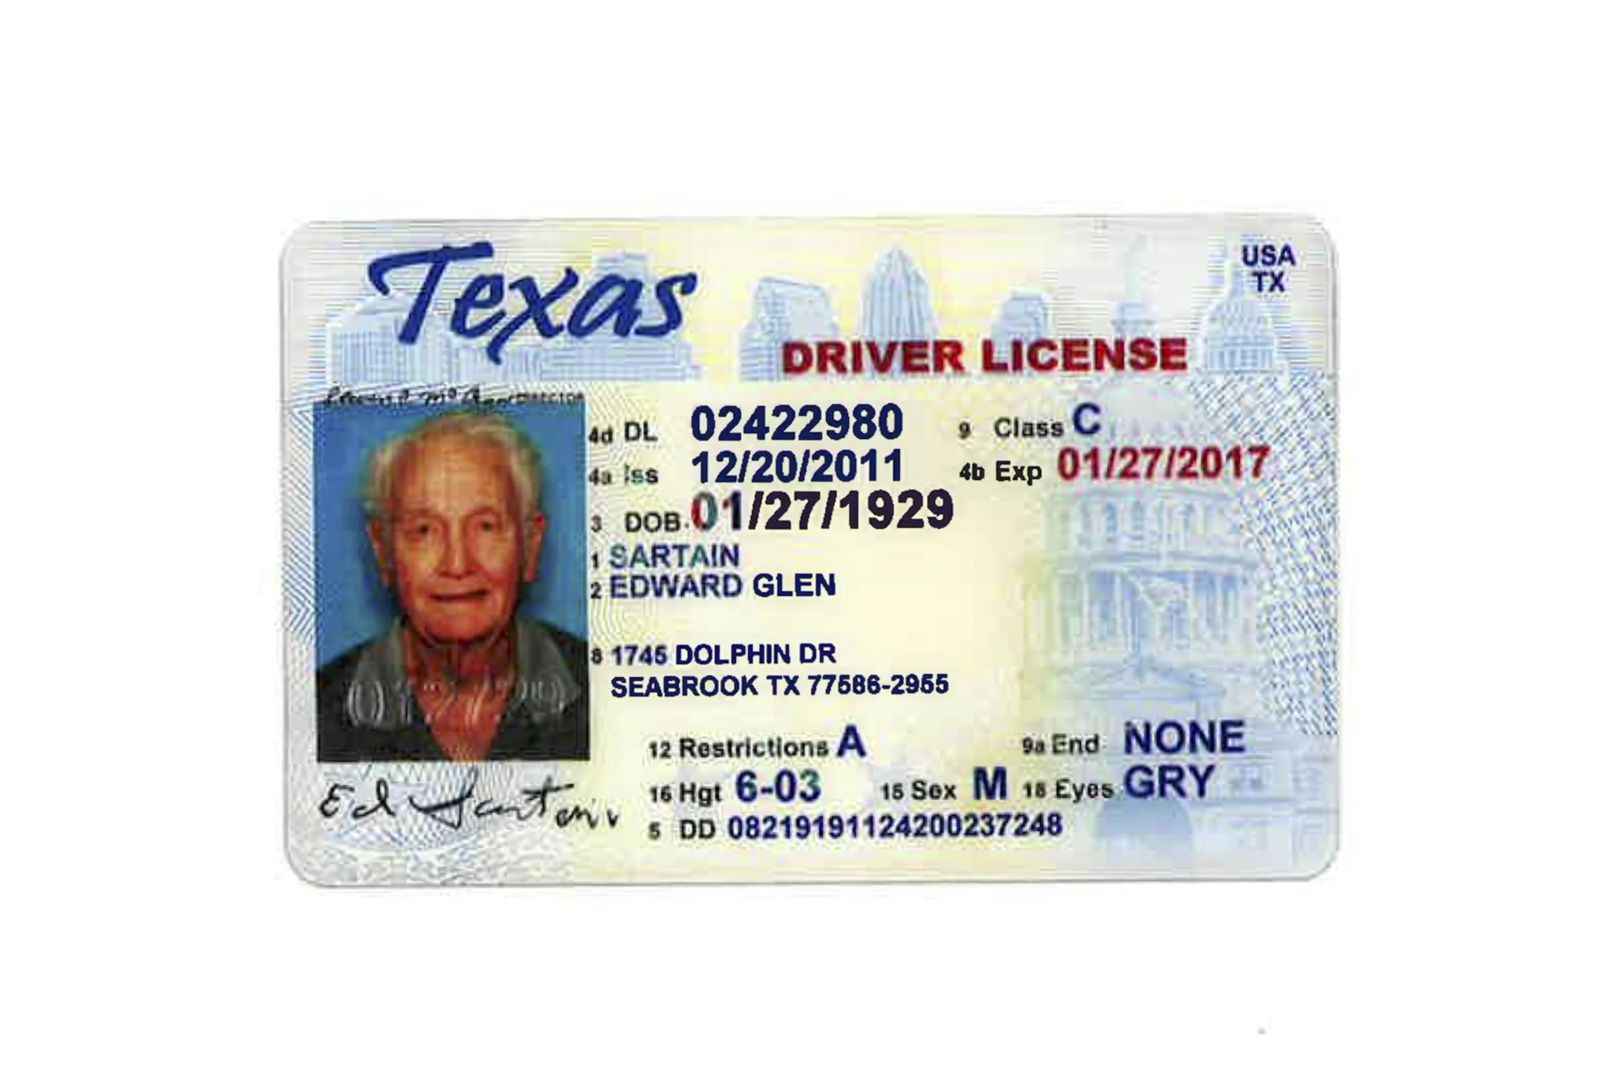 License ended. Texas Driver License. Texas Driver License New. License USA.